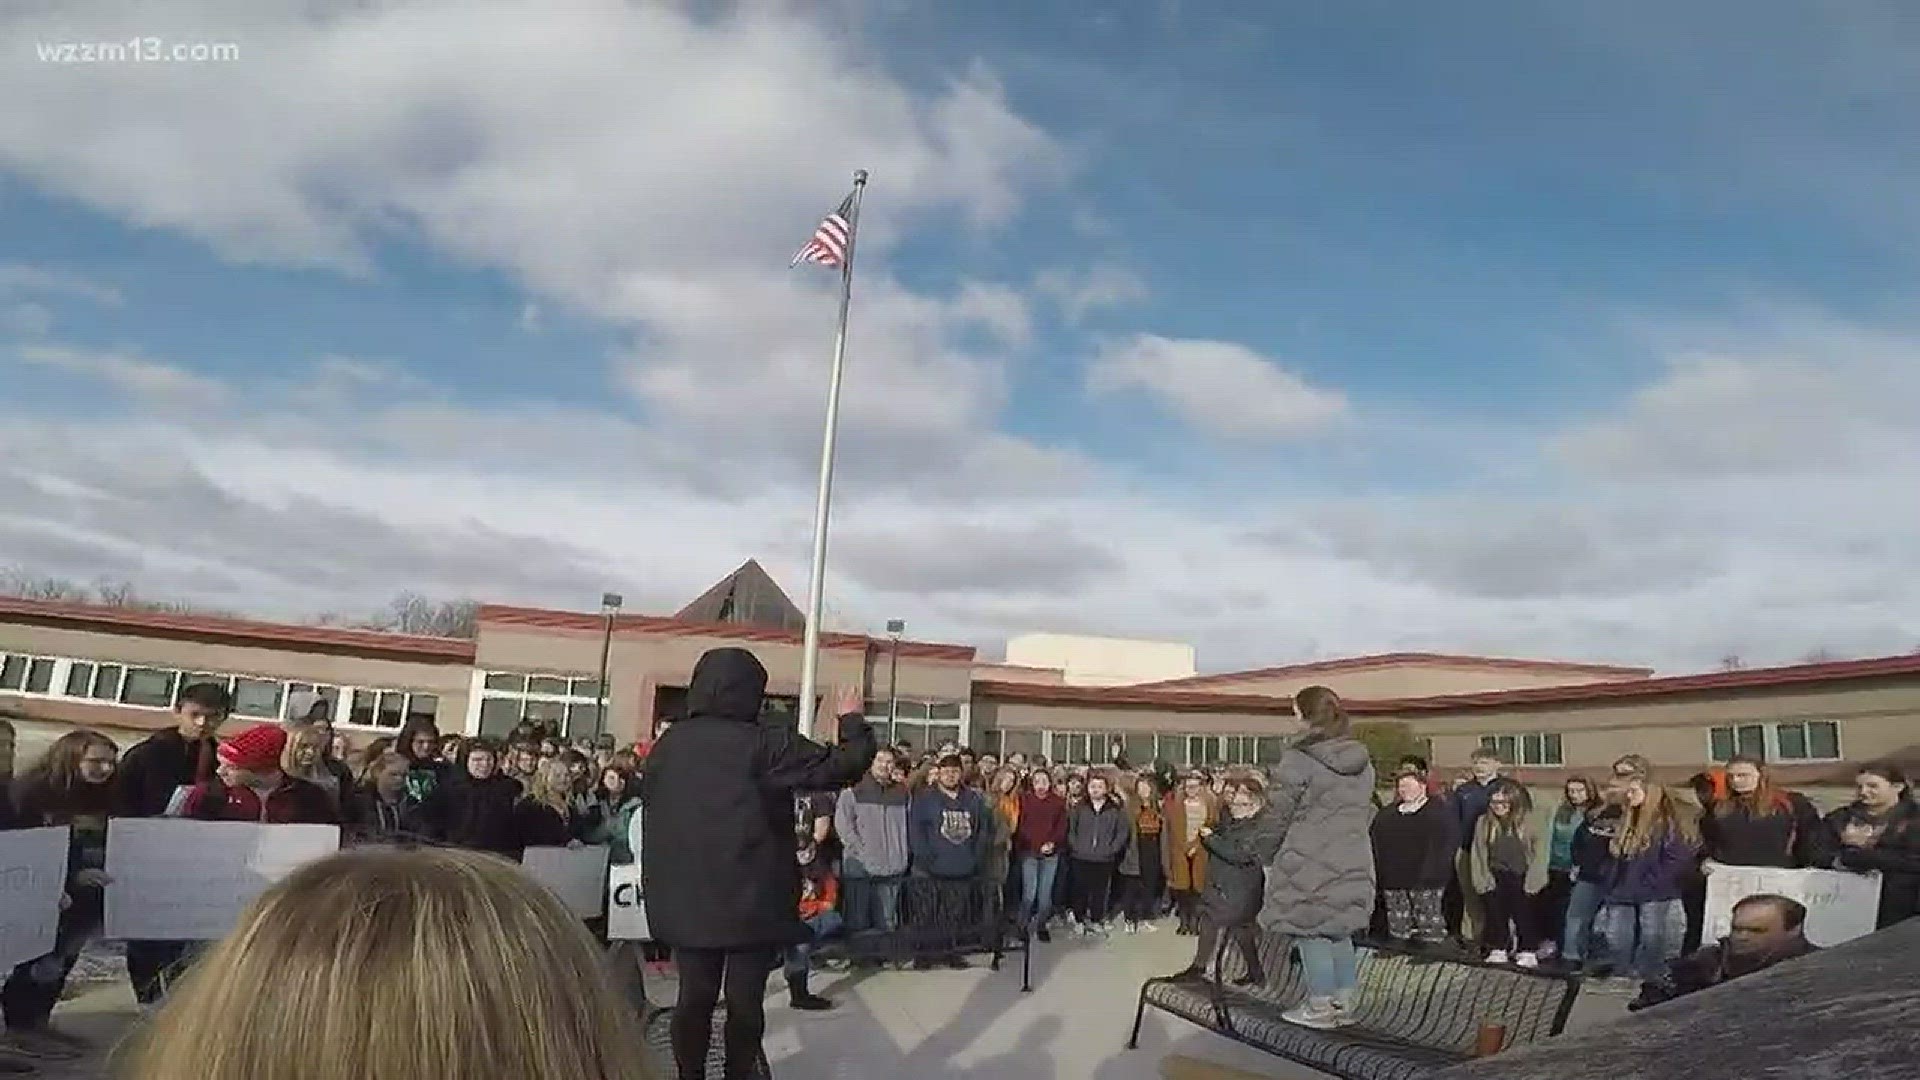 Allegan students also joined walkout movement